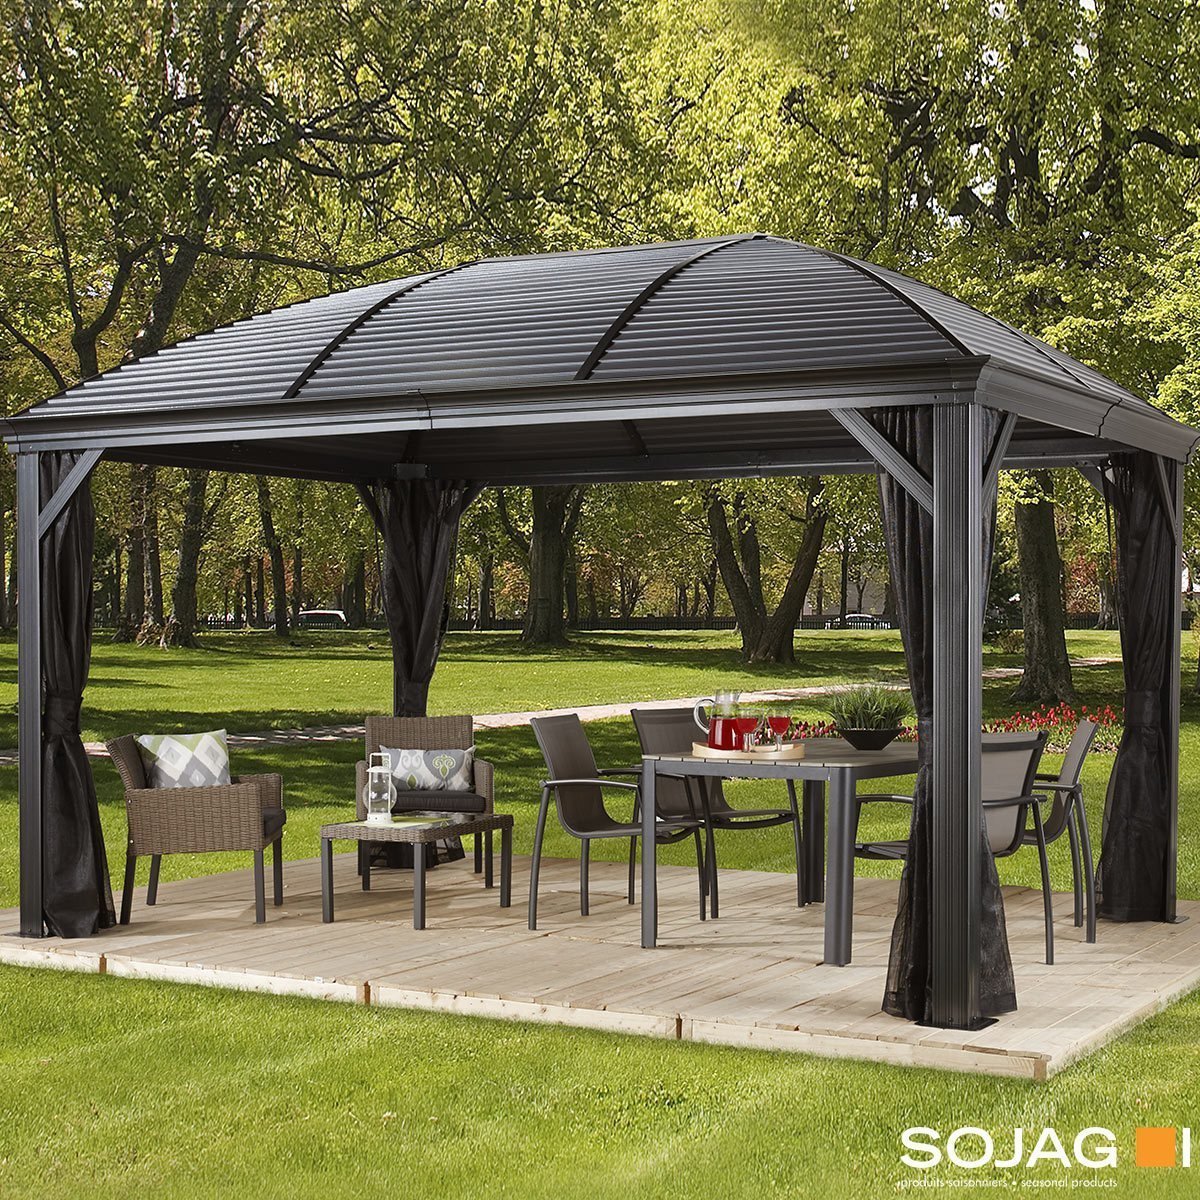 Sojag Moreno 10ft x 14ft (3.04 x 4.26m) Aluminium Frame Sun Shelter with Galvanised Steel Roof + Insect Netting - Signature Retail Stores